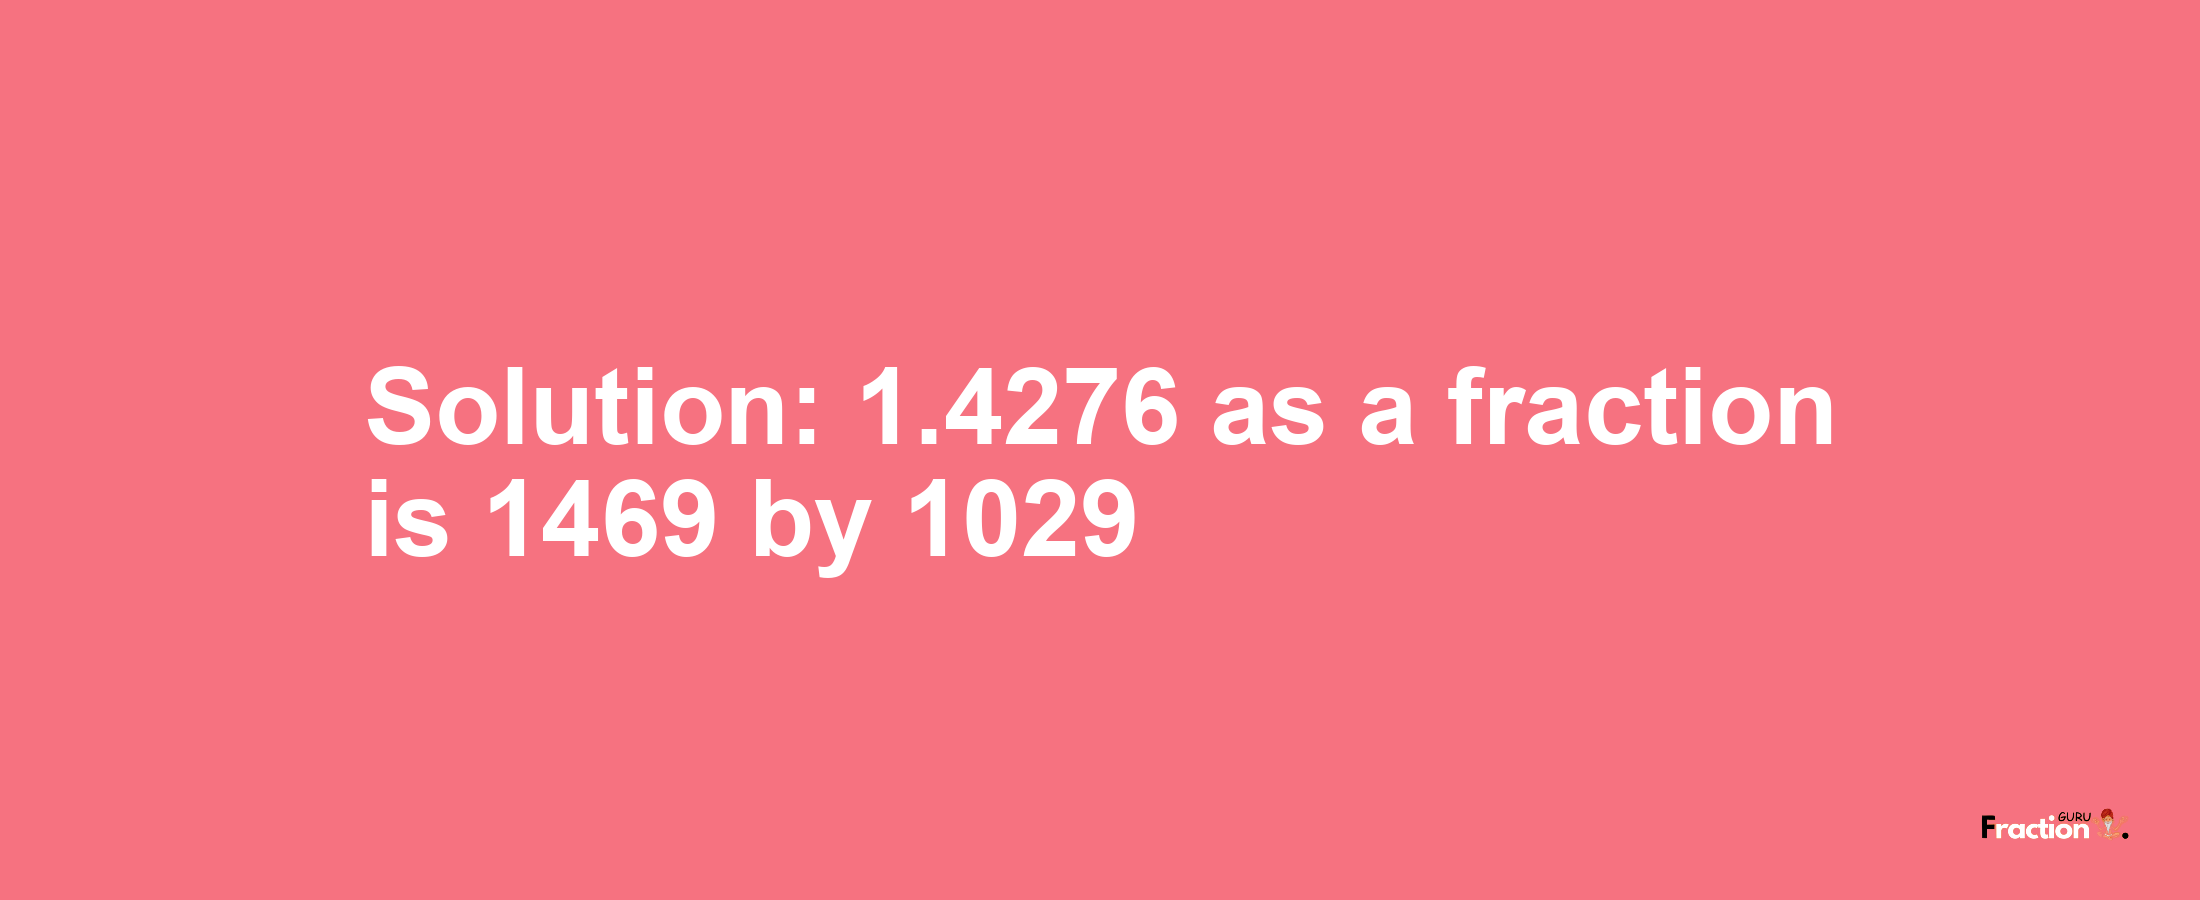 Solution:1.4276 as a fraction is 1469/1029